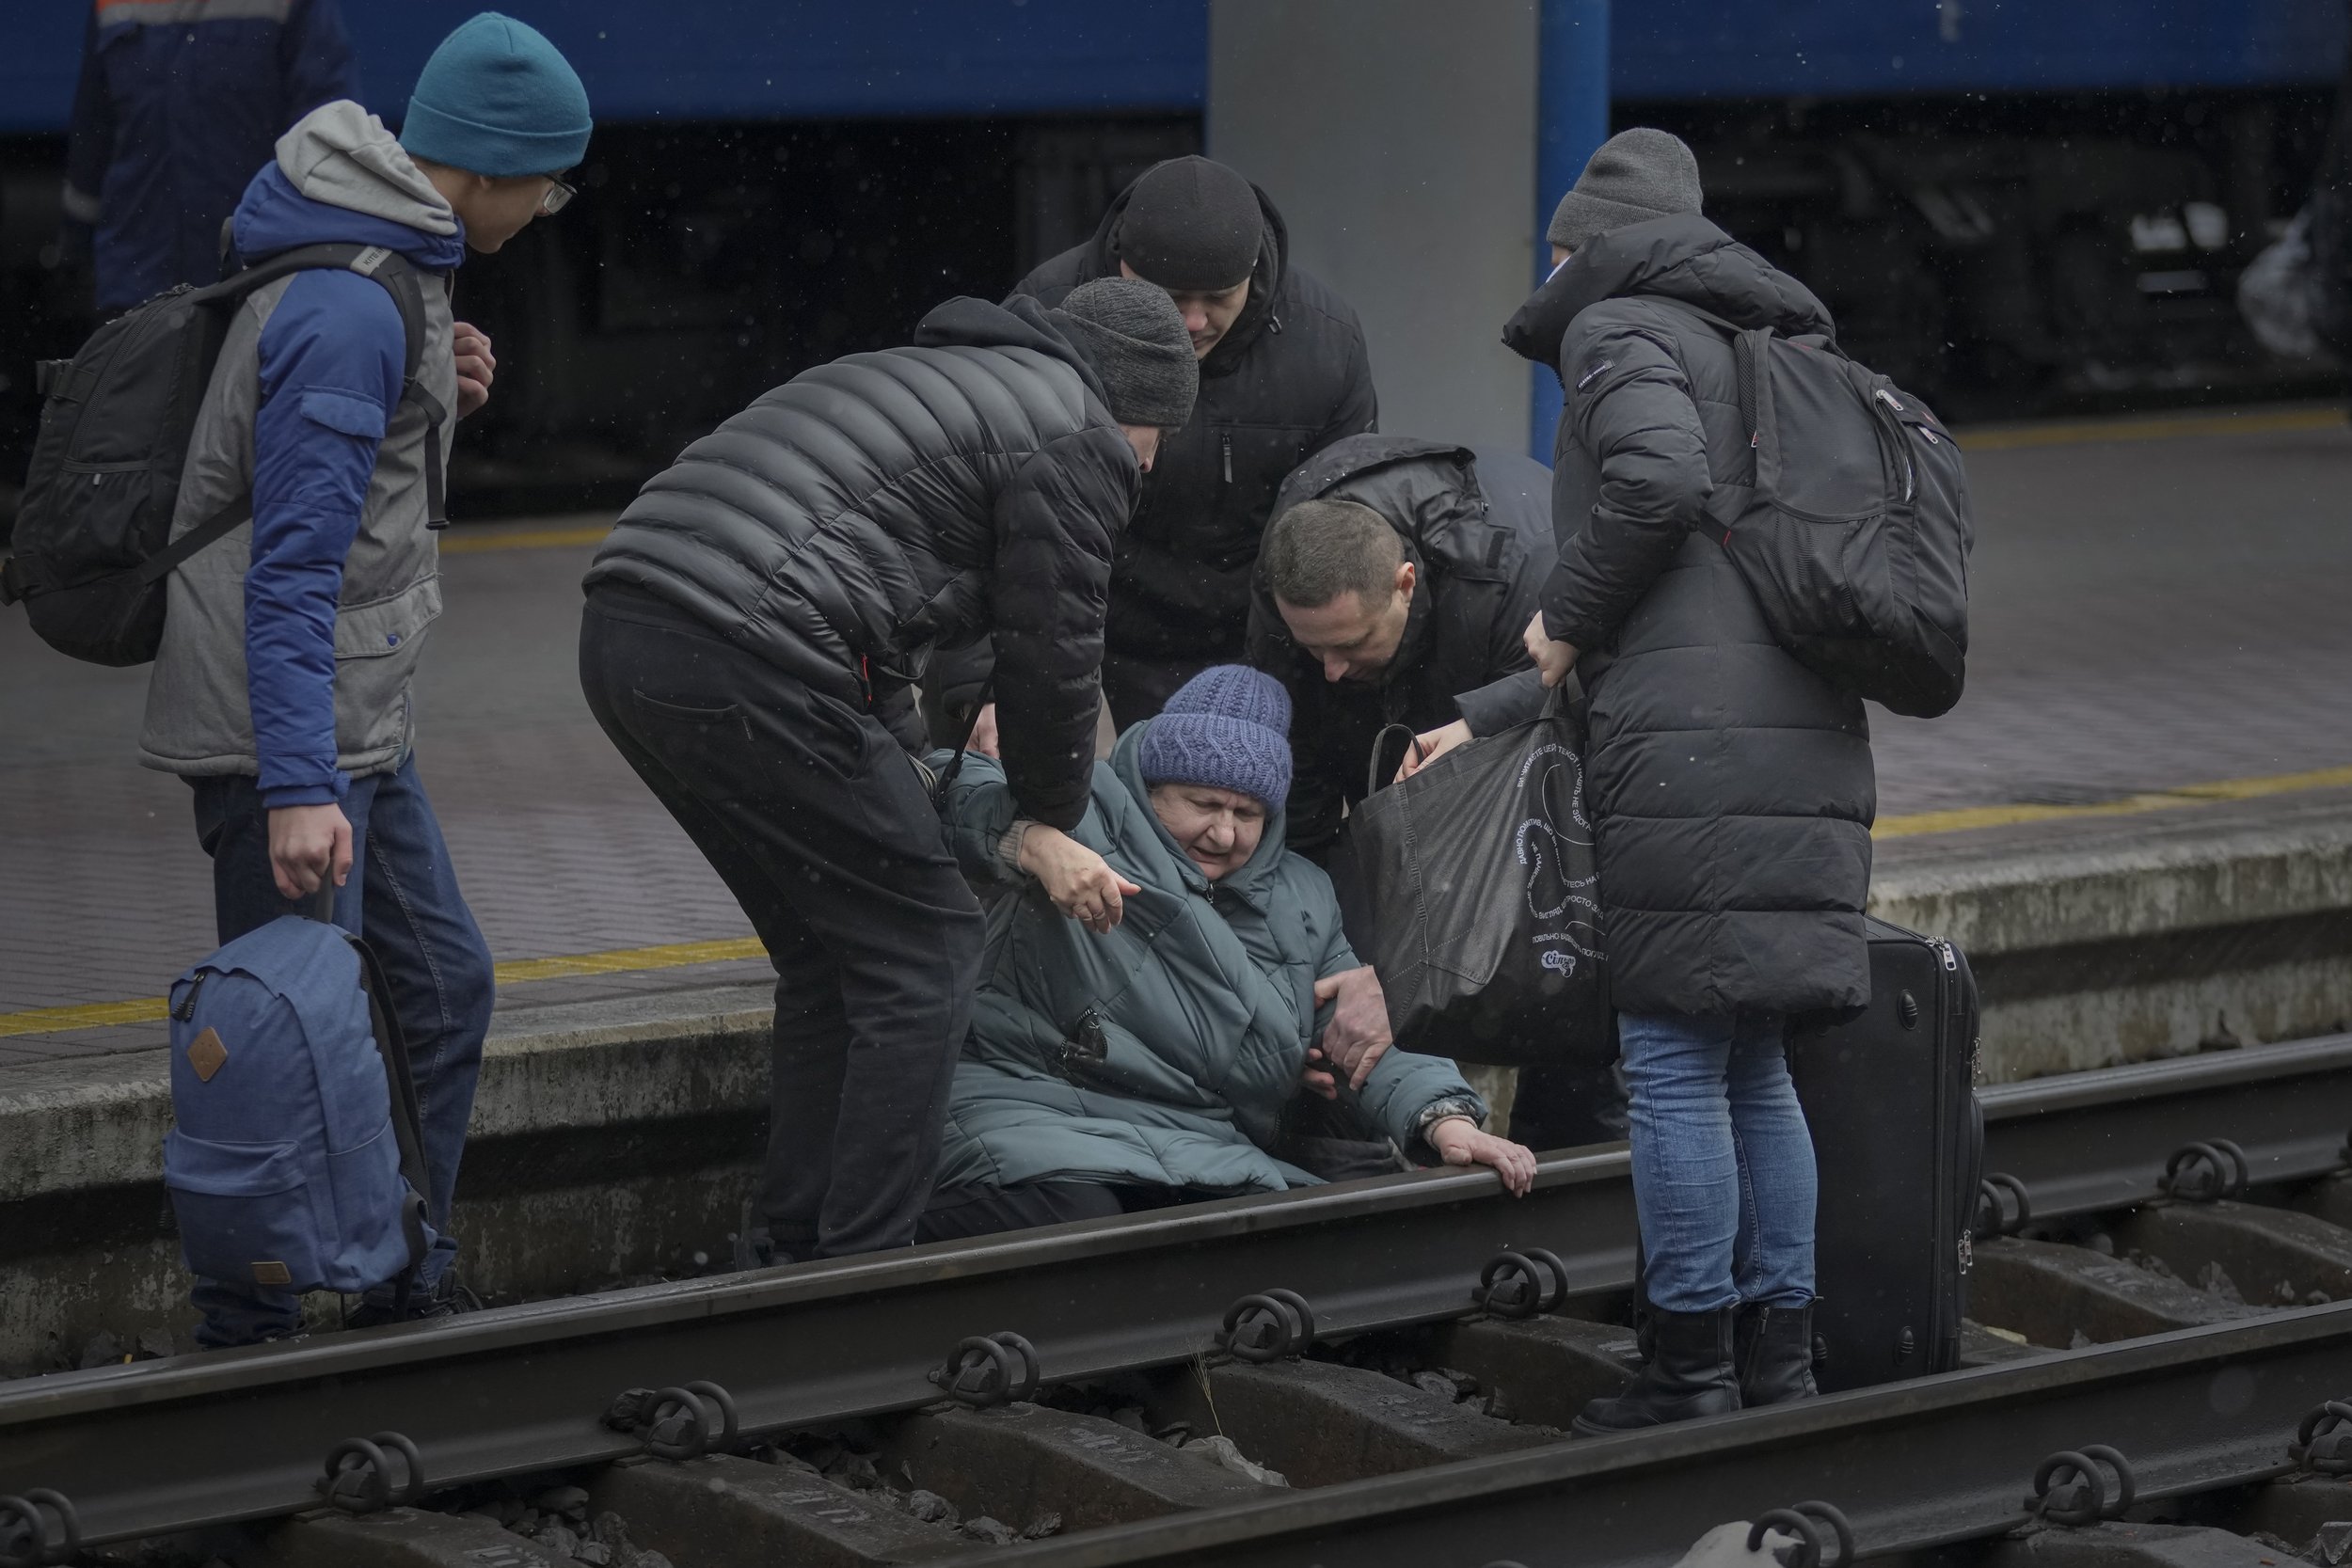  A woman gets help after falling on the tracks trying to reach a Lviv bound train, in Kyiv, Ukraine, Thursday, March 3, 2022.  (AP Photo/Vadim Ghirda) 